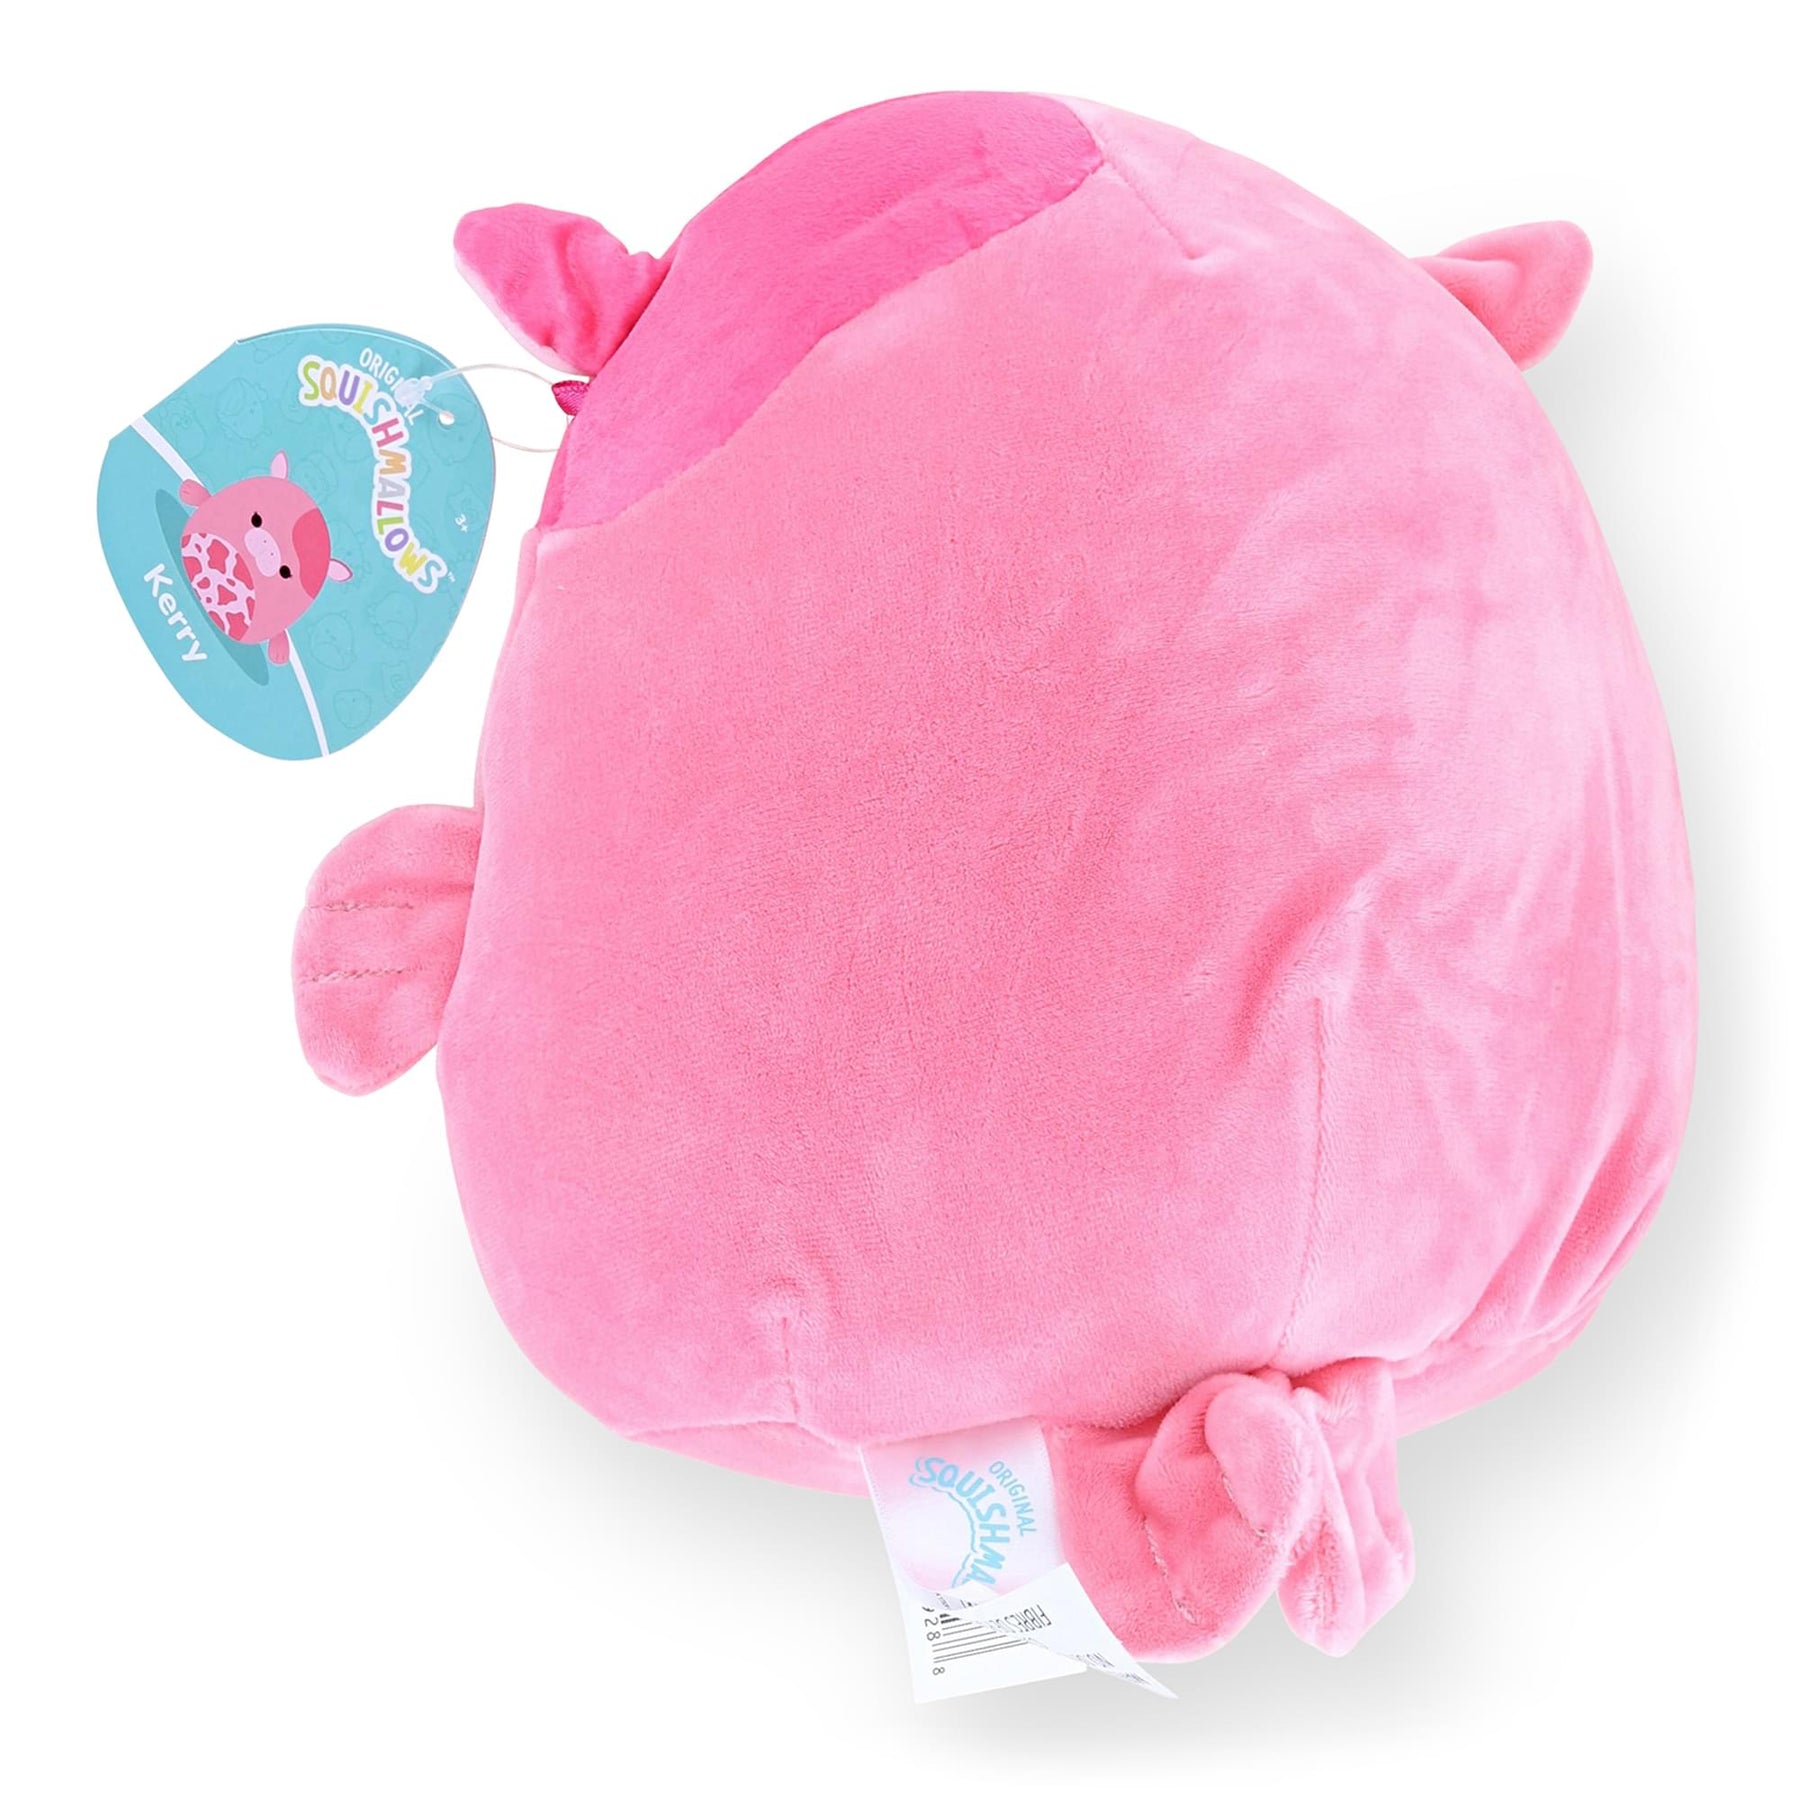 Squishmallow 12 Inch Sea Life Plush | Kerry the Hot Pink Sea Cow